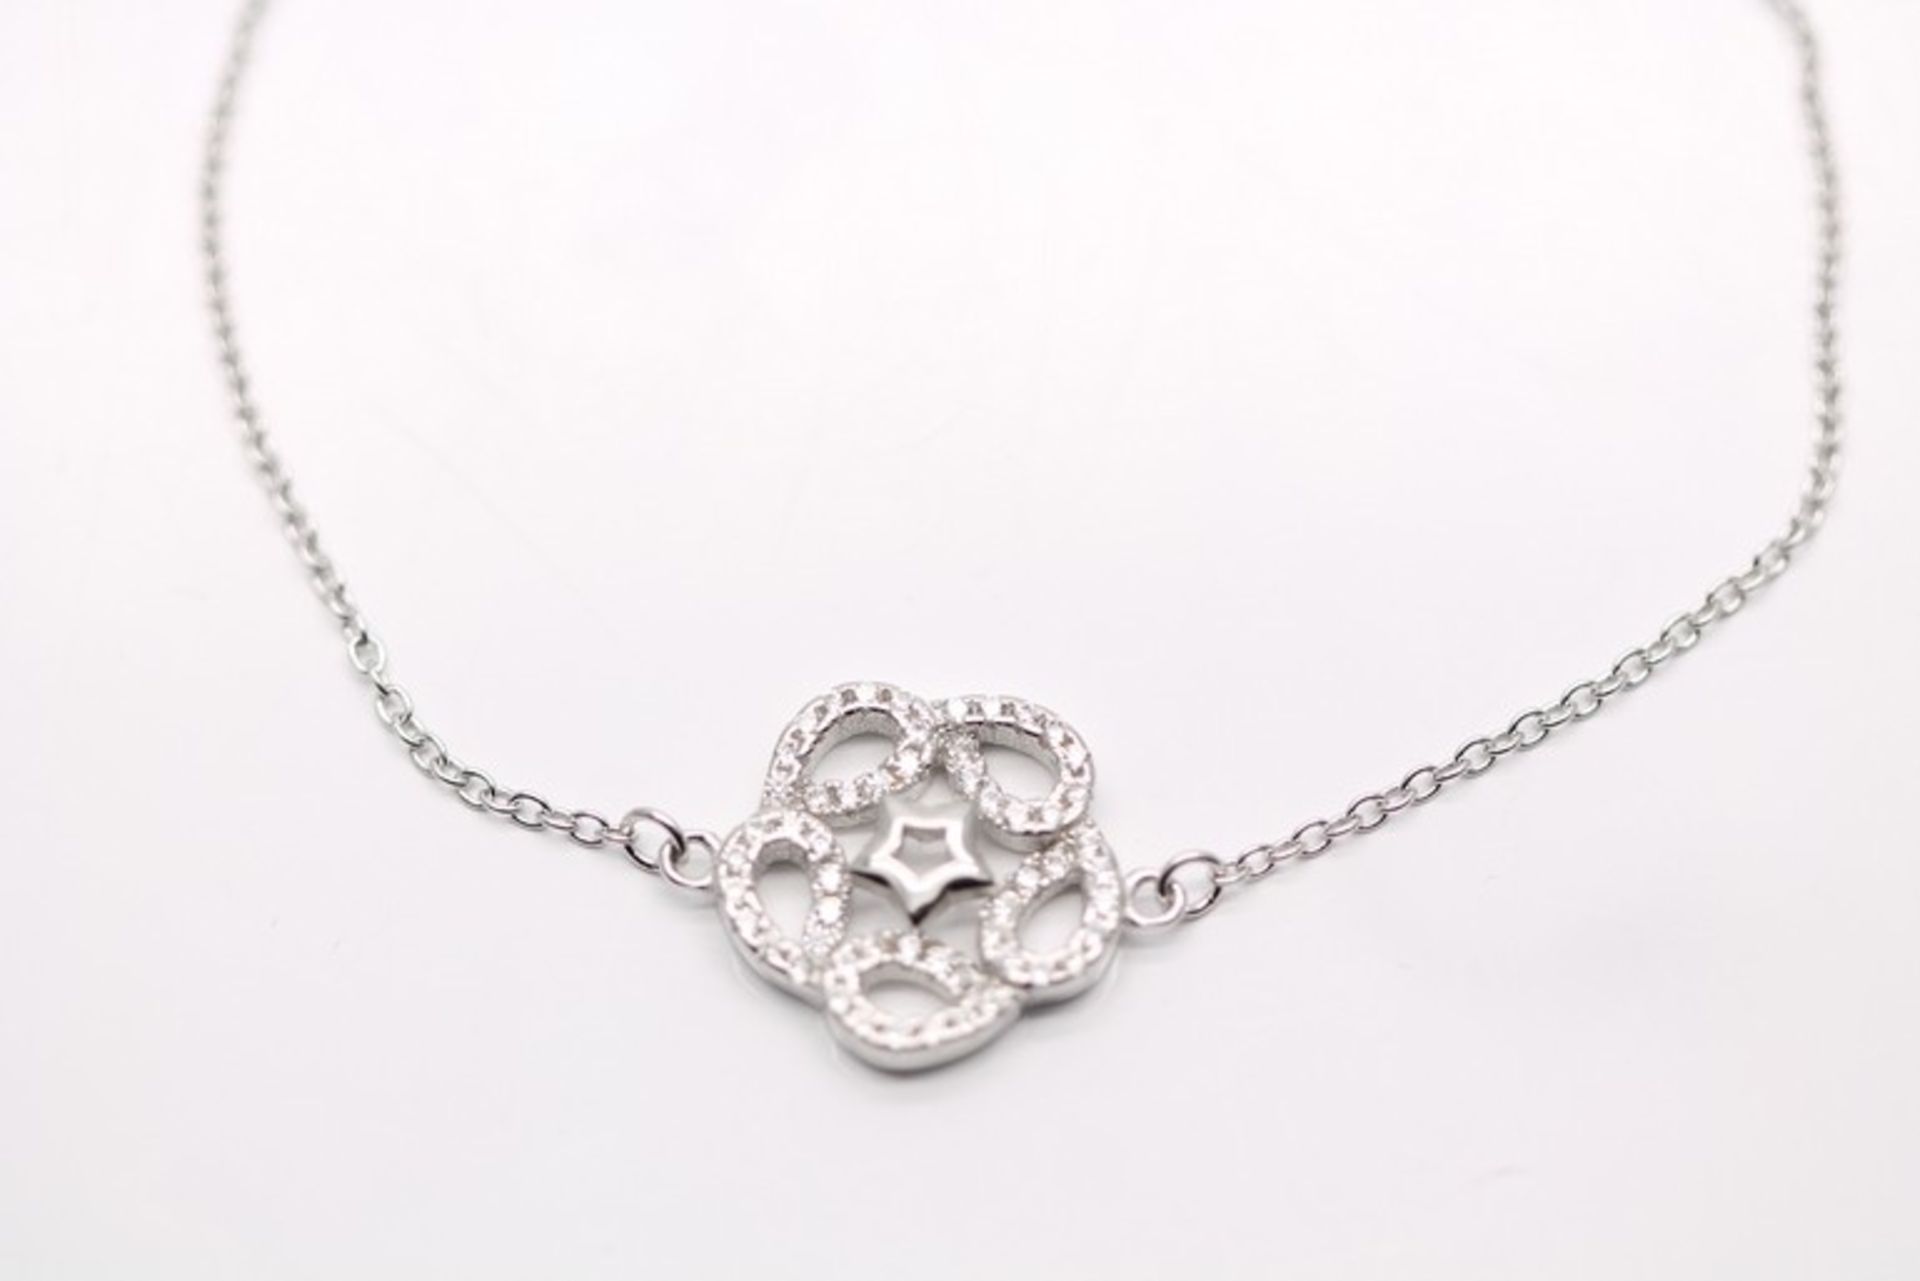 1 x BOXED BRAND NEW SOLID SILVER LADIES BRACELET WITH AAA+ SIMULATED DIAMONDS SET IN A DECORATIVE